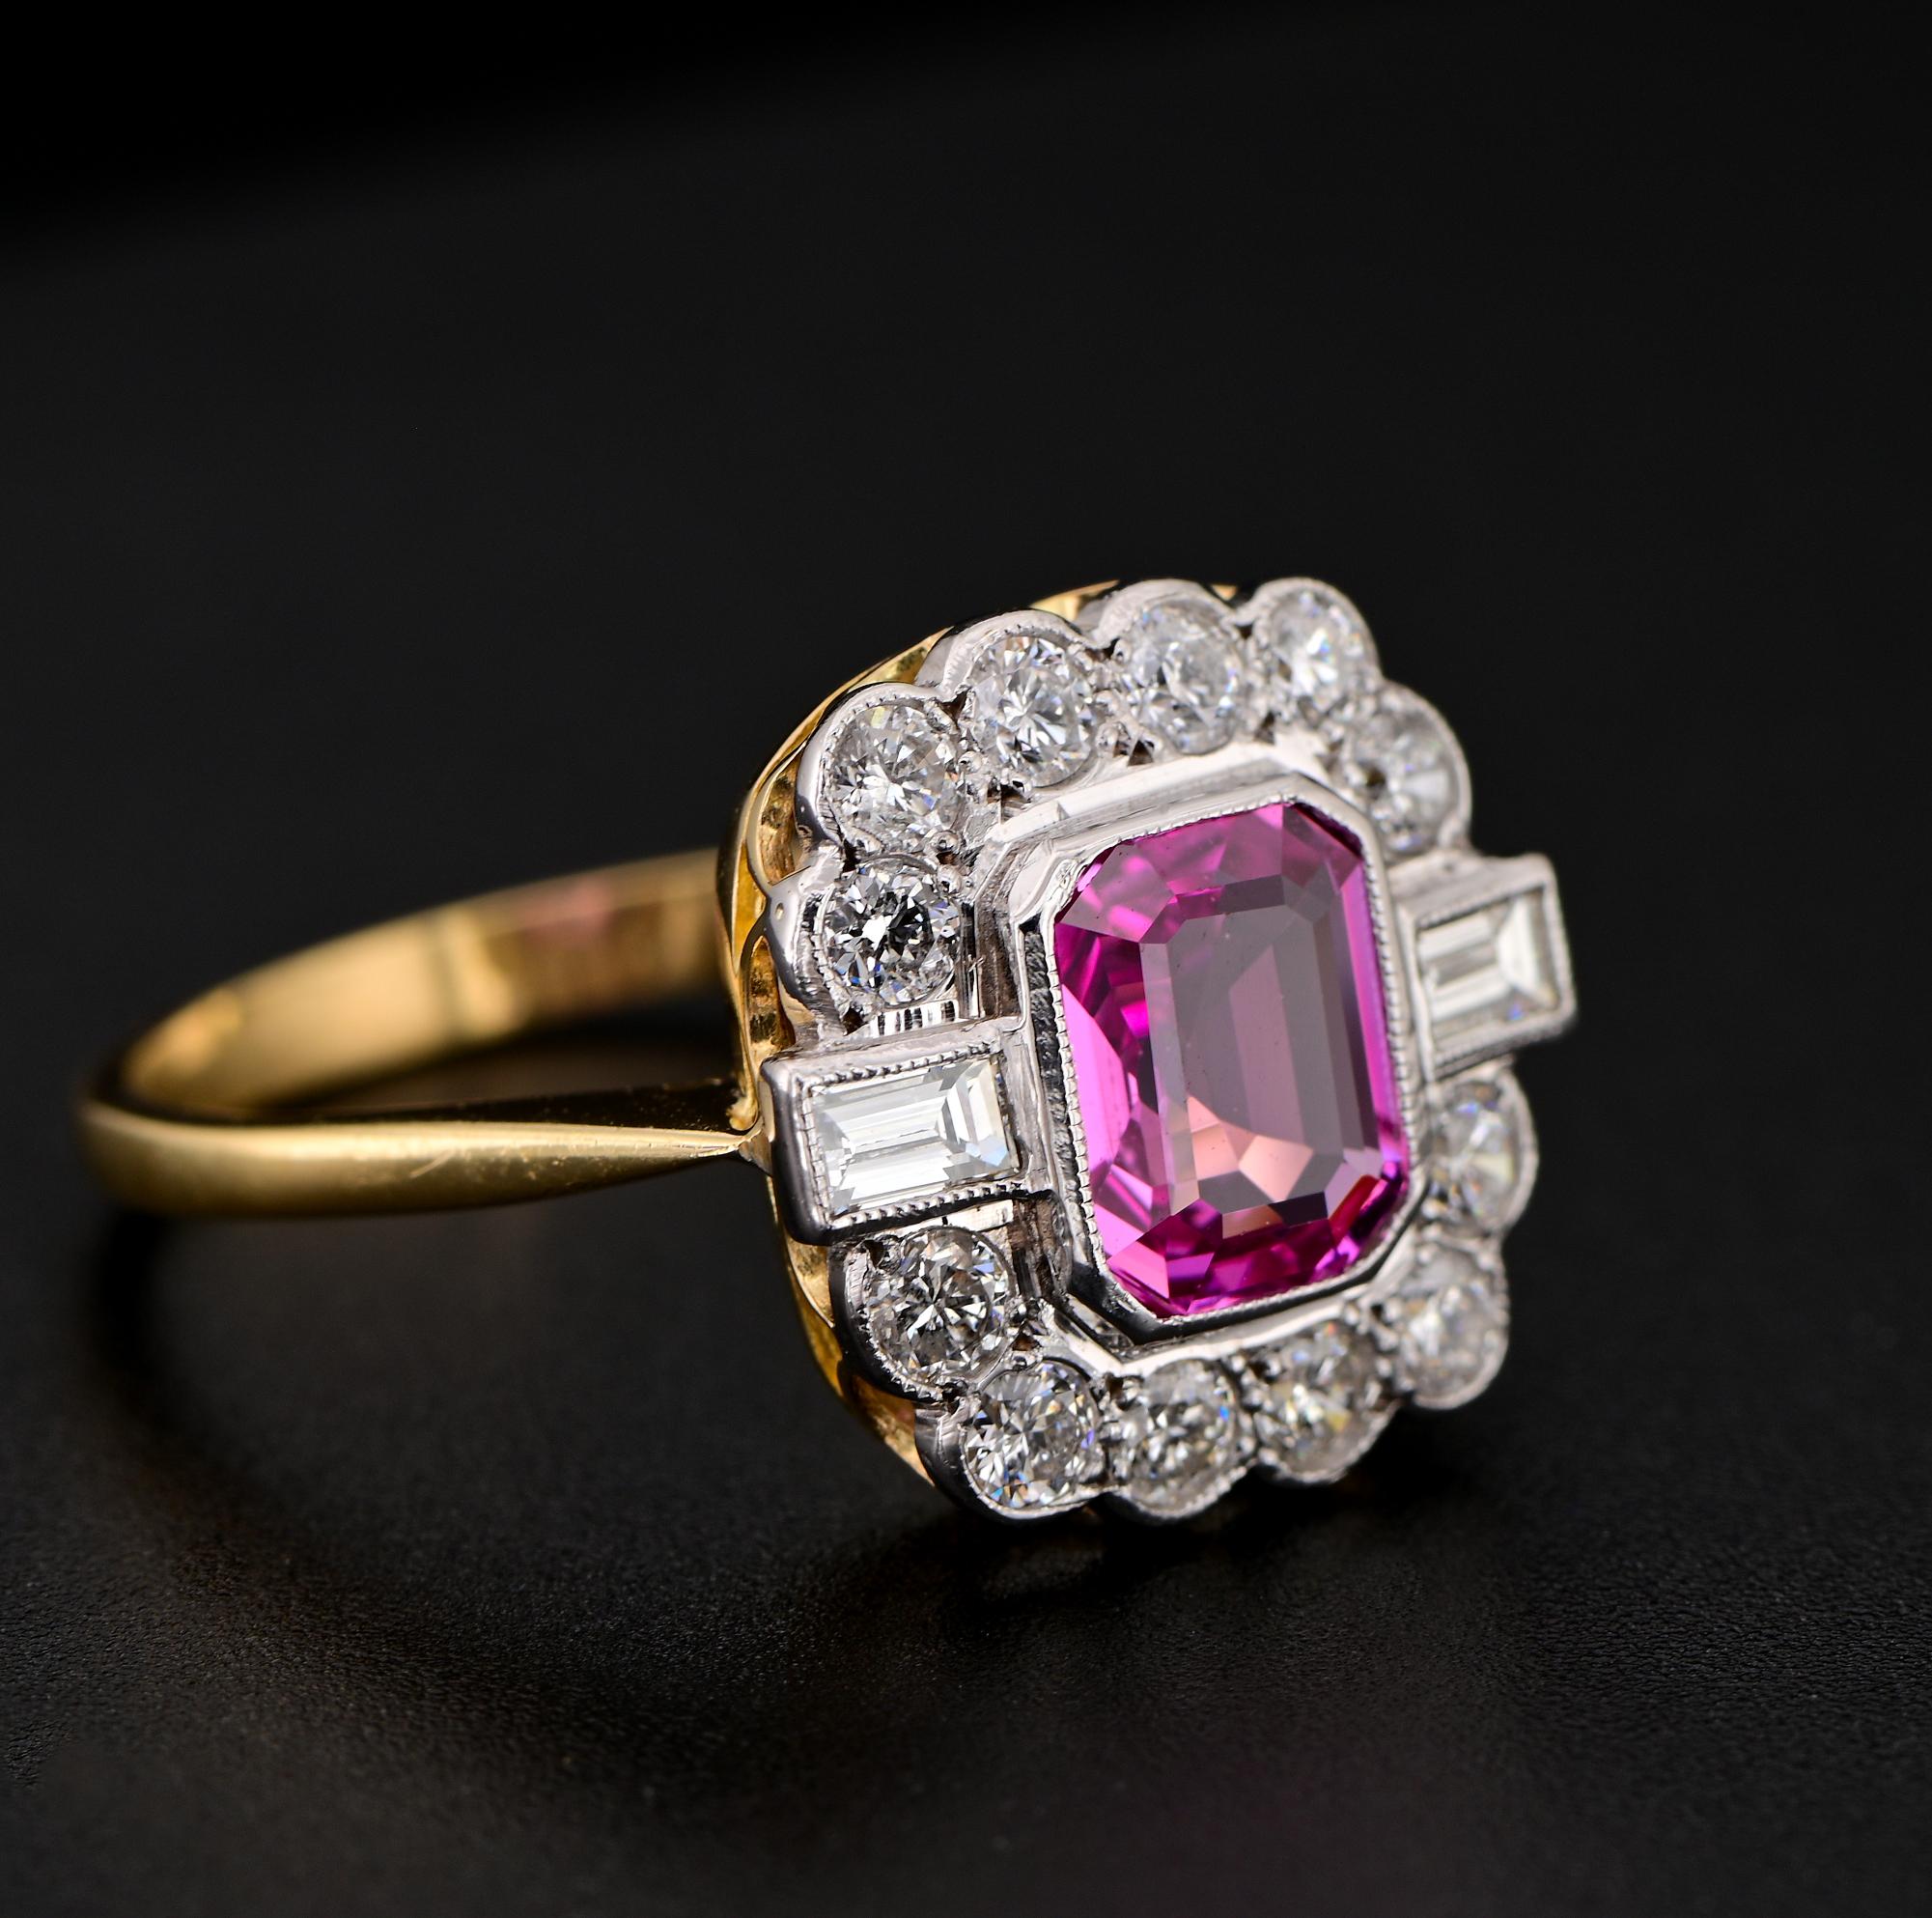 Emerald Cut Art Deco 1.40 Ct. Certified Pink Sapphire 1.04 CT Diamond Ring For Sale